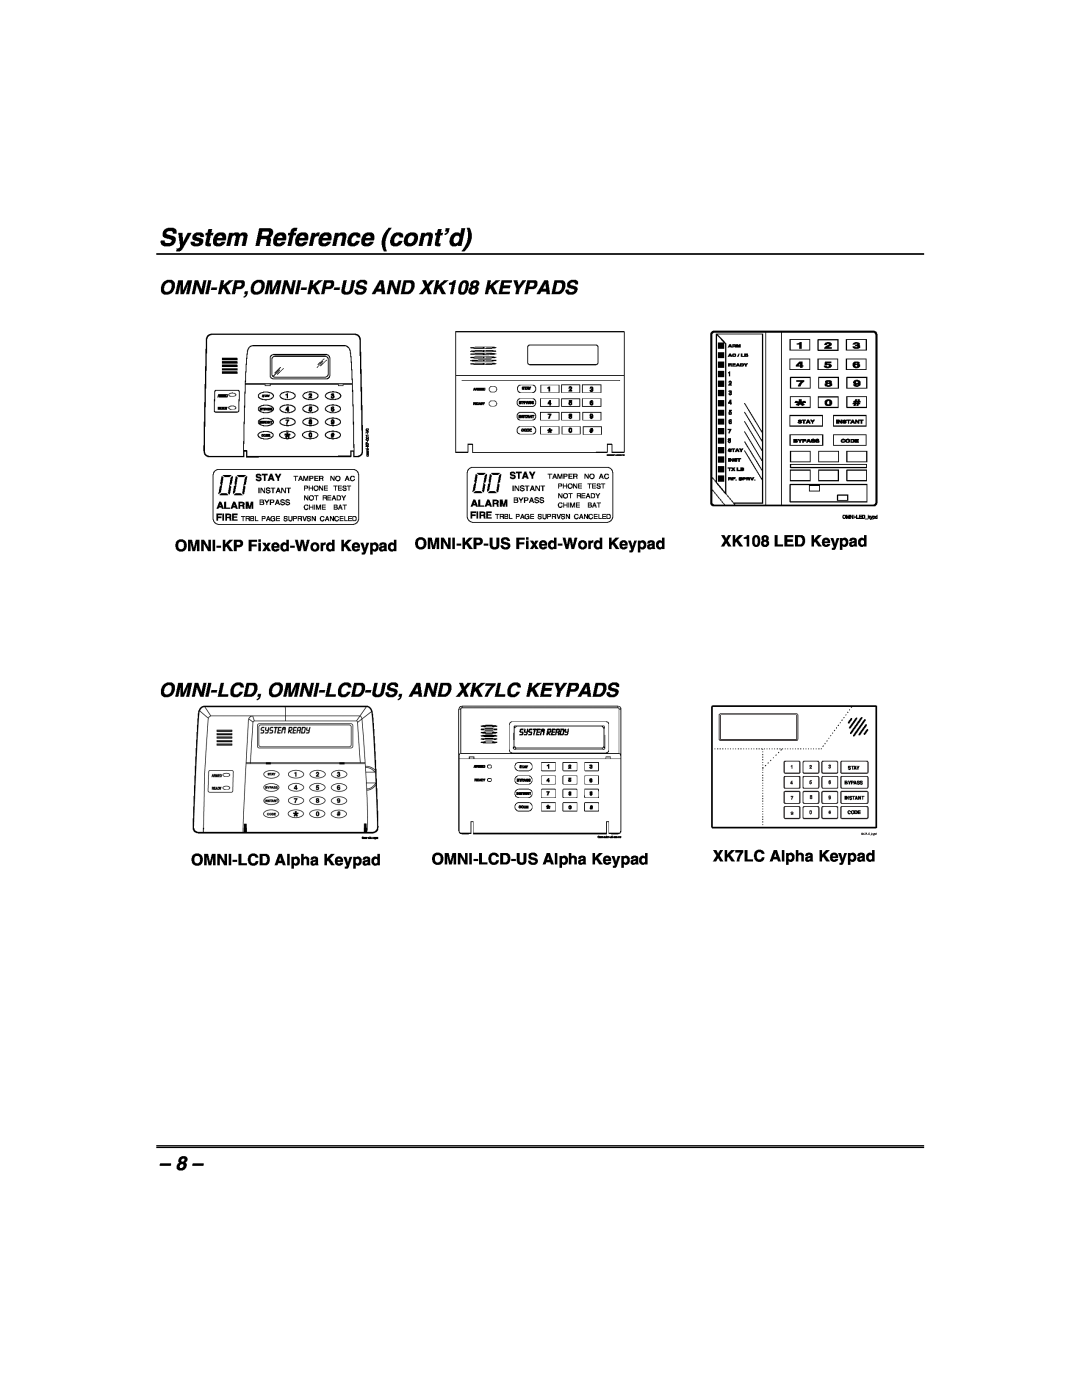 Honeywell 408 System Reference cont’d, OMNI-KP,OMNI-KP-USAND XK108 KEYPADS, OMNI-LCD, OMNI-LCD-US,AND XK7LC KEYPADS, Stay 